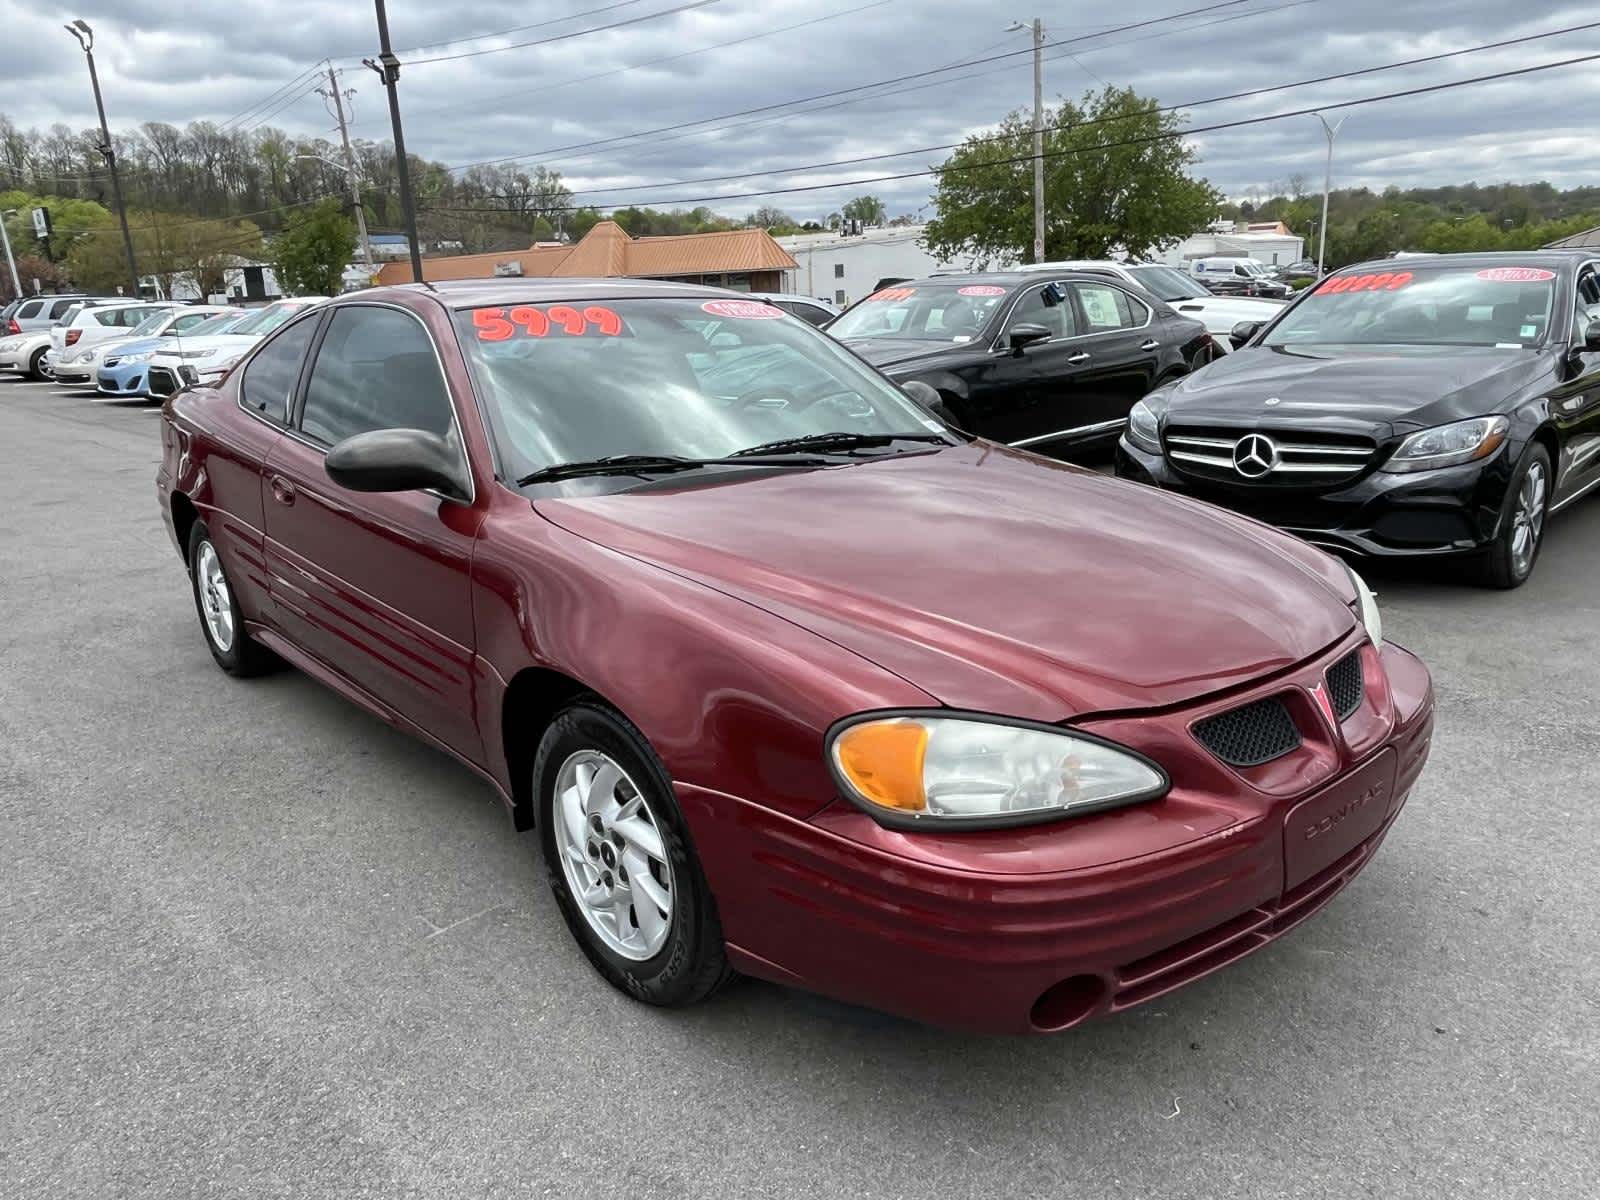 Used 2002 Pontiac Grand Am SE1 with VIN 1G2NF12F12C285115 for sale in Knoxville, TN